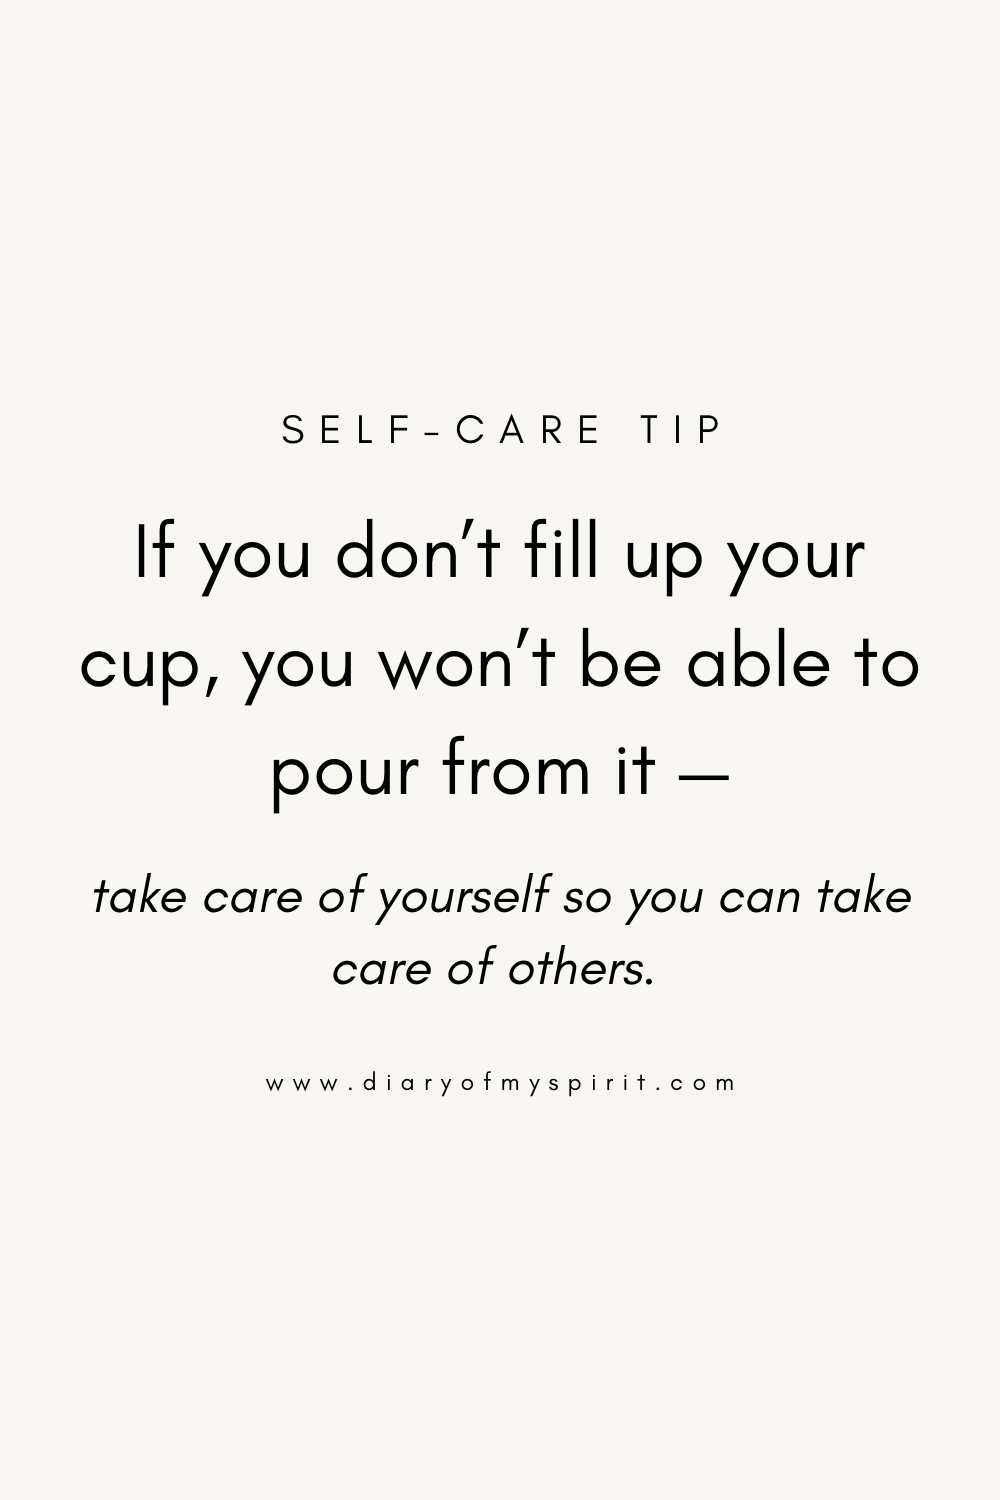 free self care ideas. ideas for self care. self care routine ideas. self care for women. self care is for everyone. how to practice self care. self care quotes